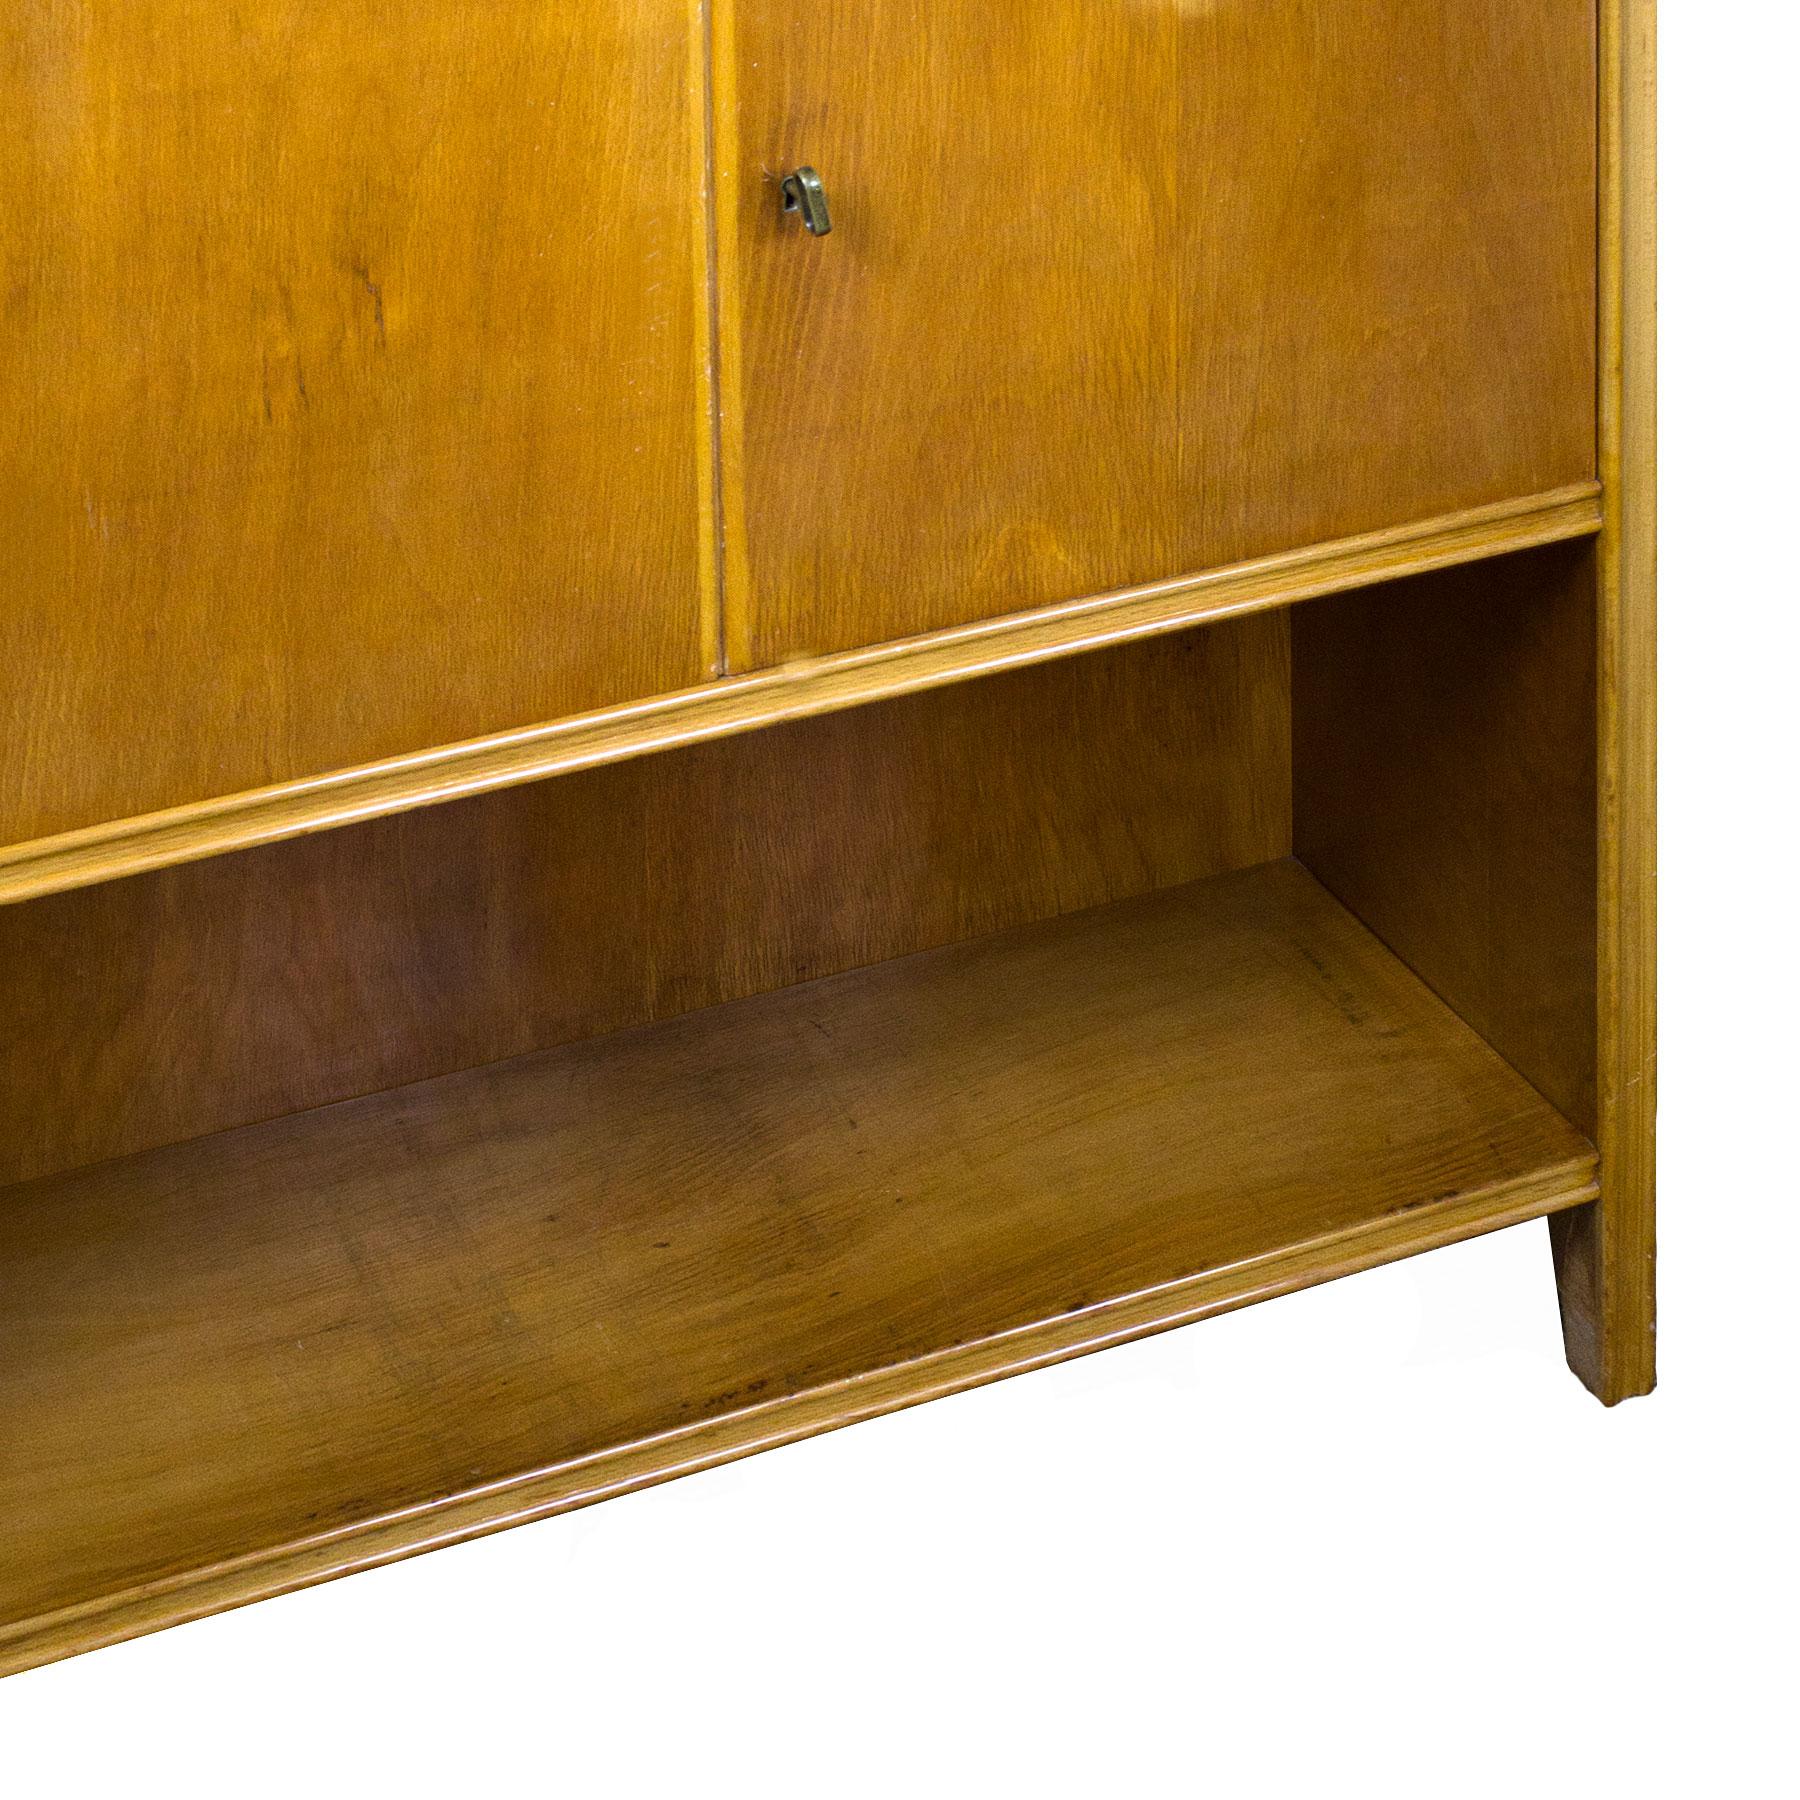 Italian Mid-Century Modern Bookcase, Maple Wood, Two Doors and Five Shelves - Italy For Sale